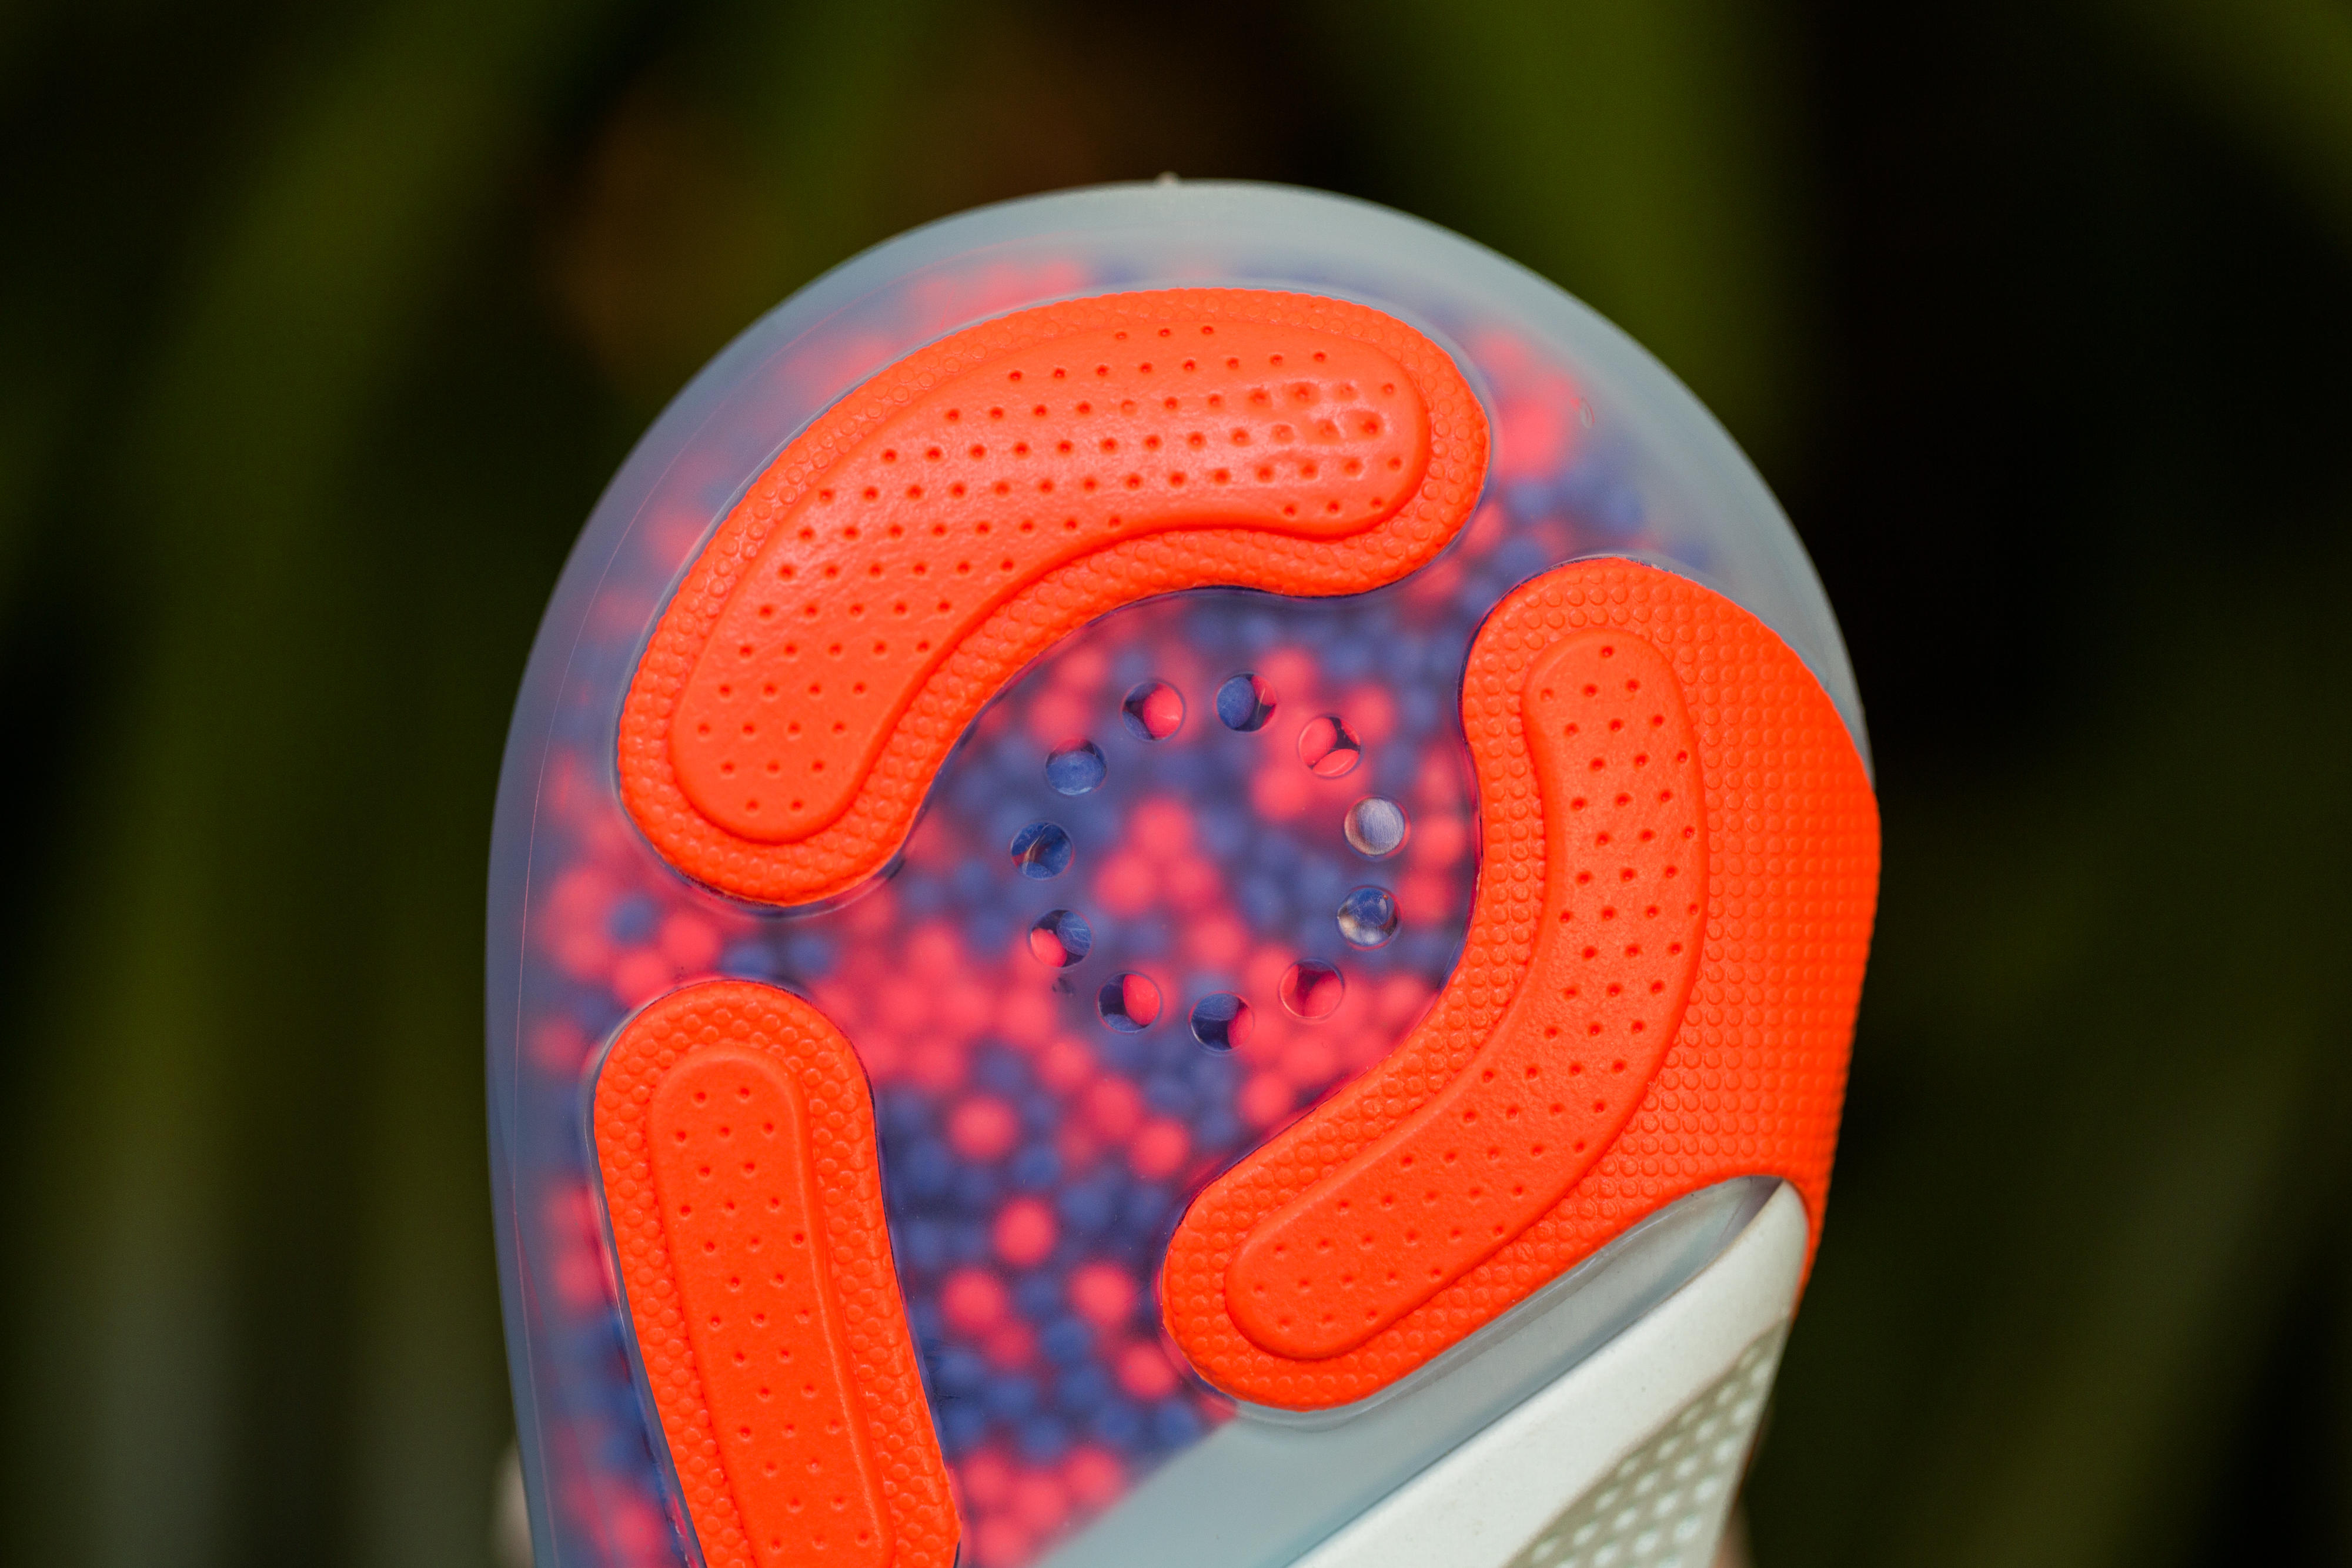 nike shoes with balls in the sole